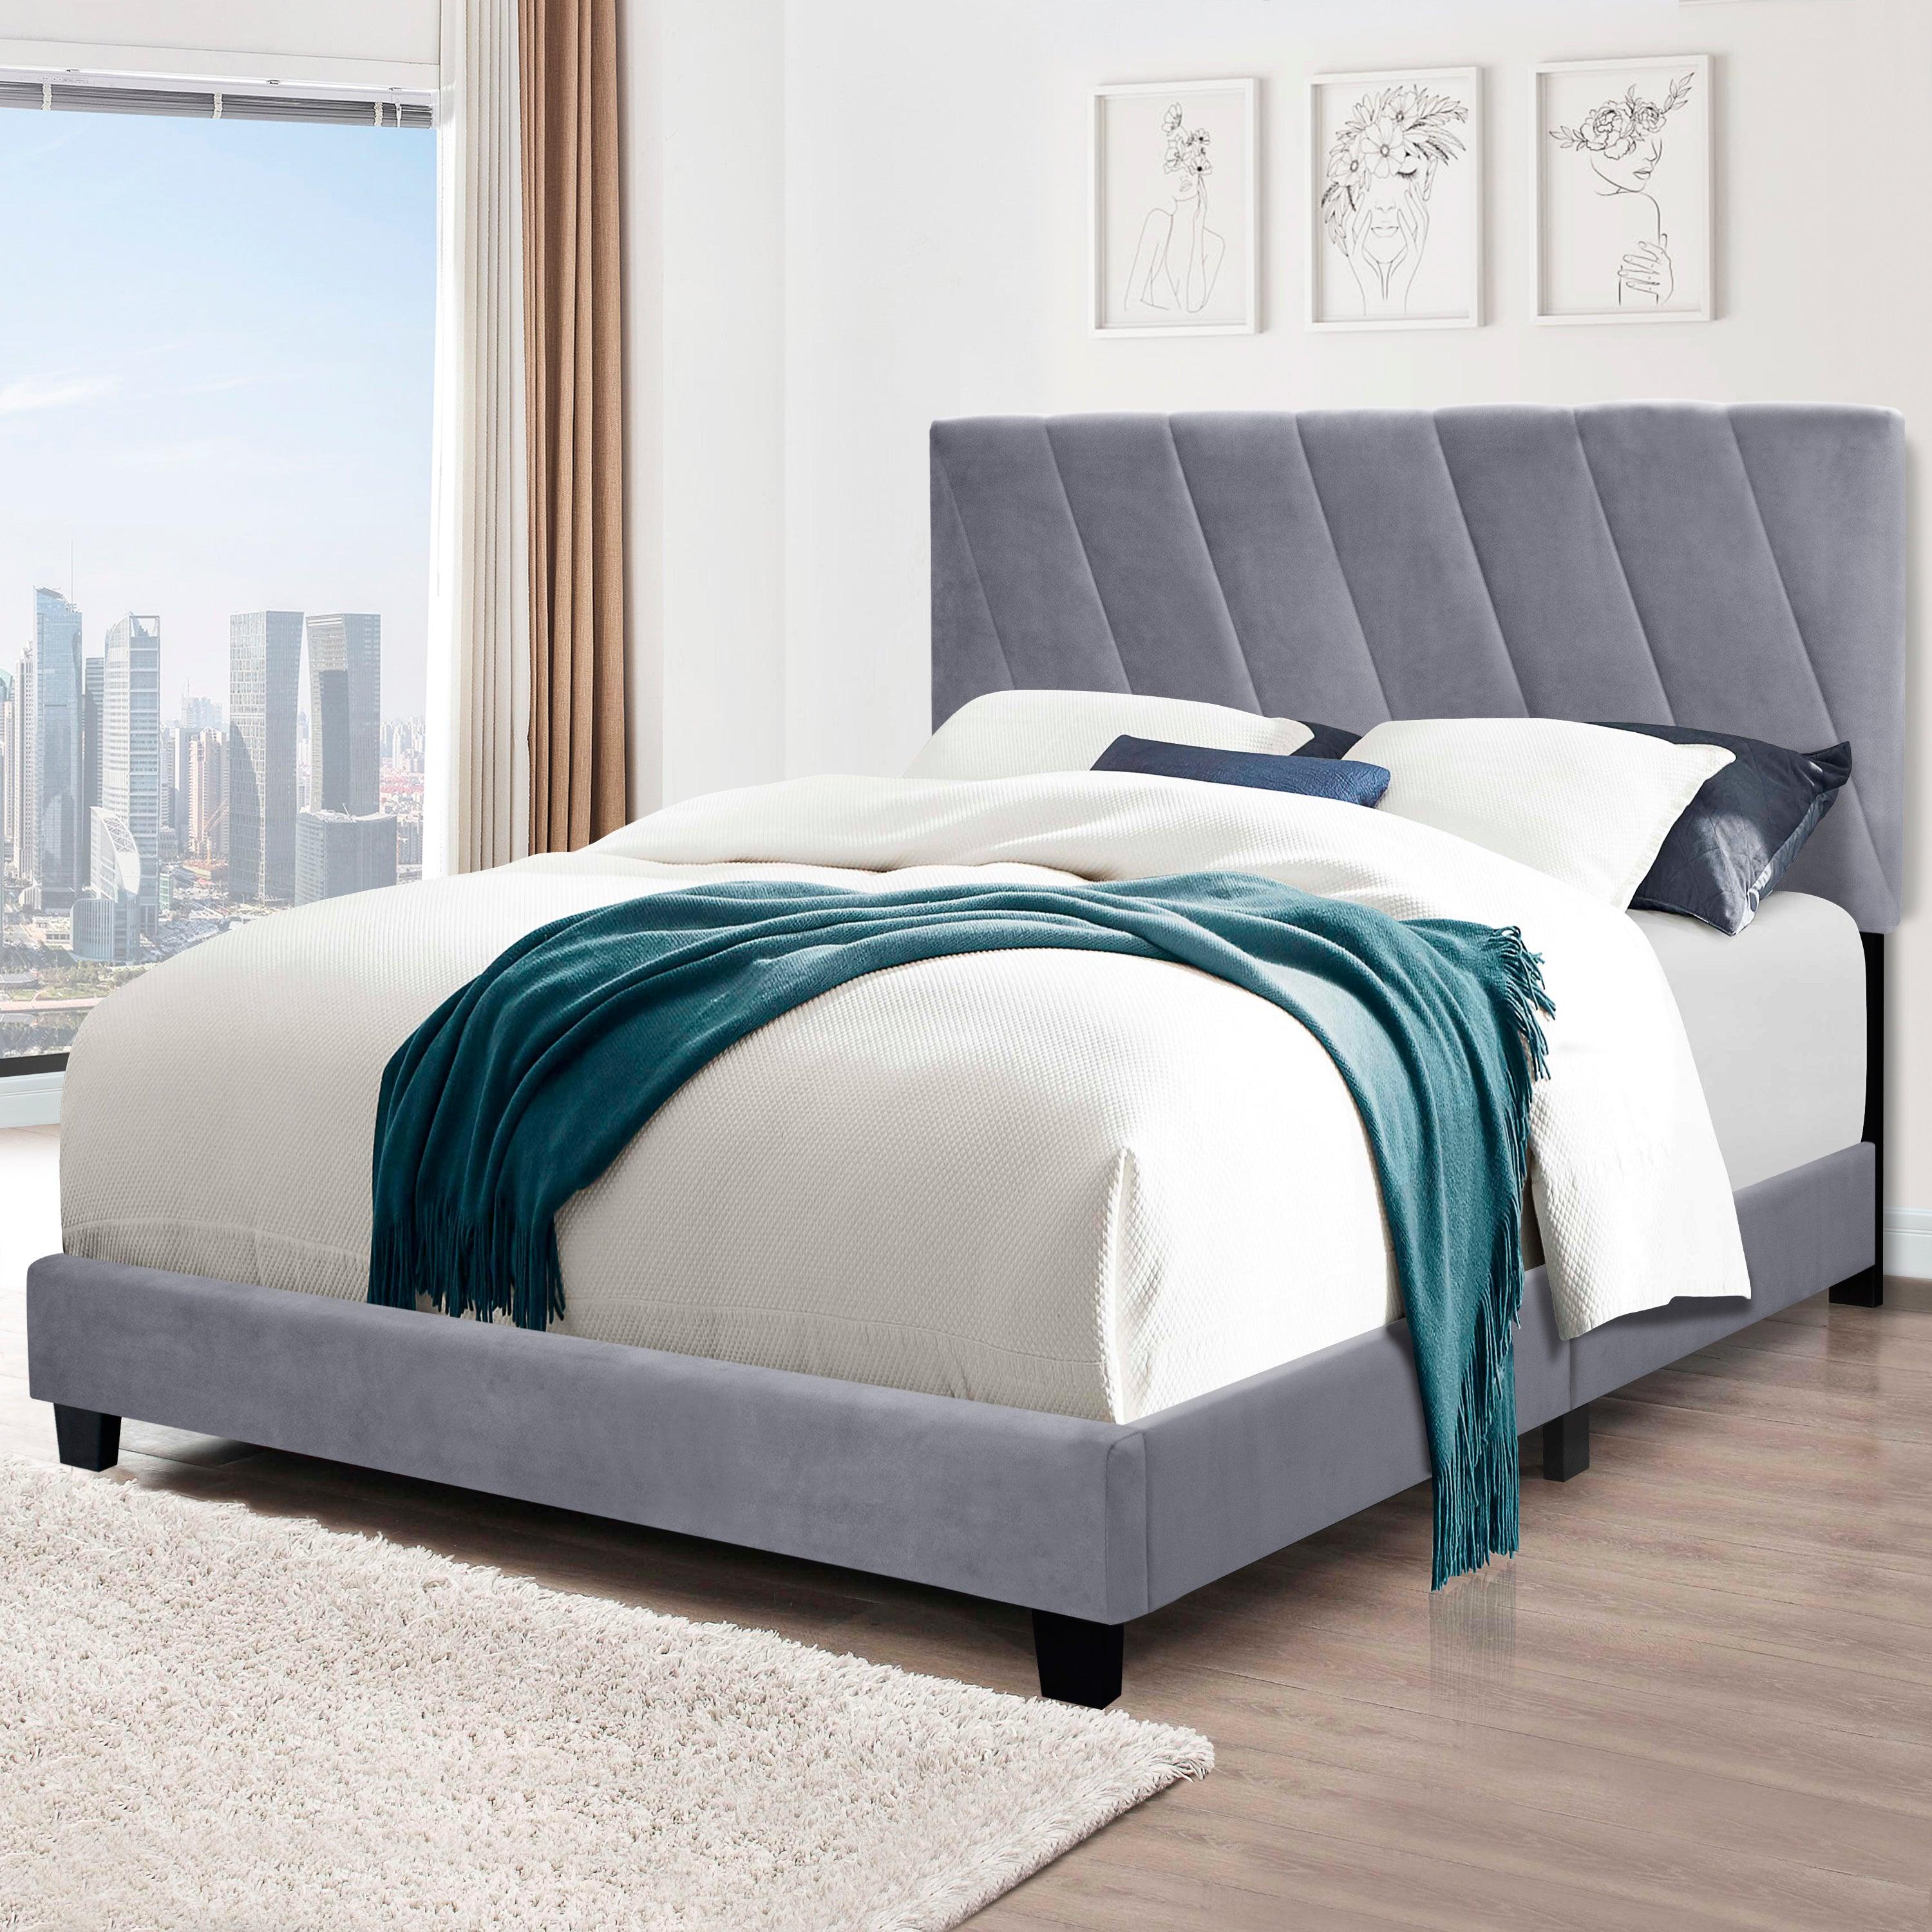 🆓🚛 Queen Size Adjustable Upholstered Bed Stain Resistant and Durable, Modern Style, Gray